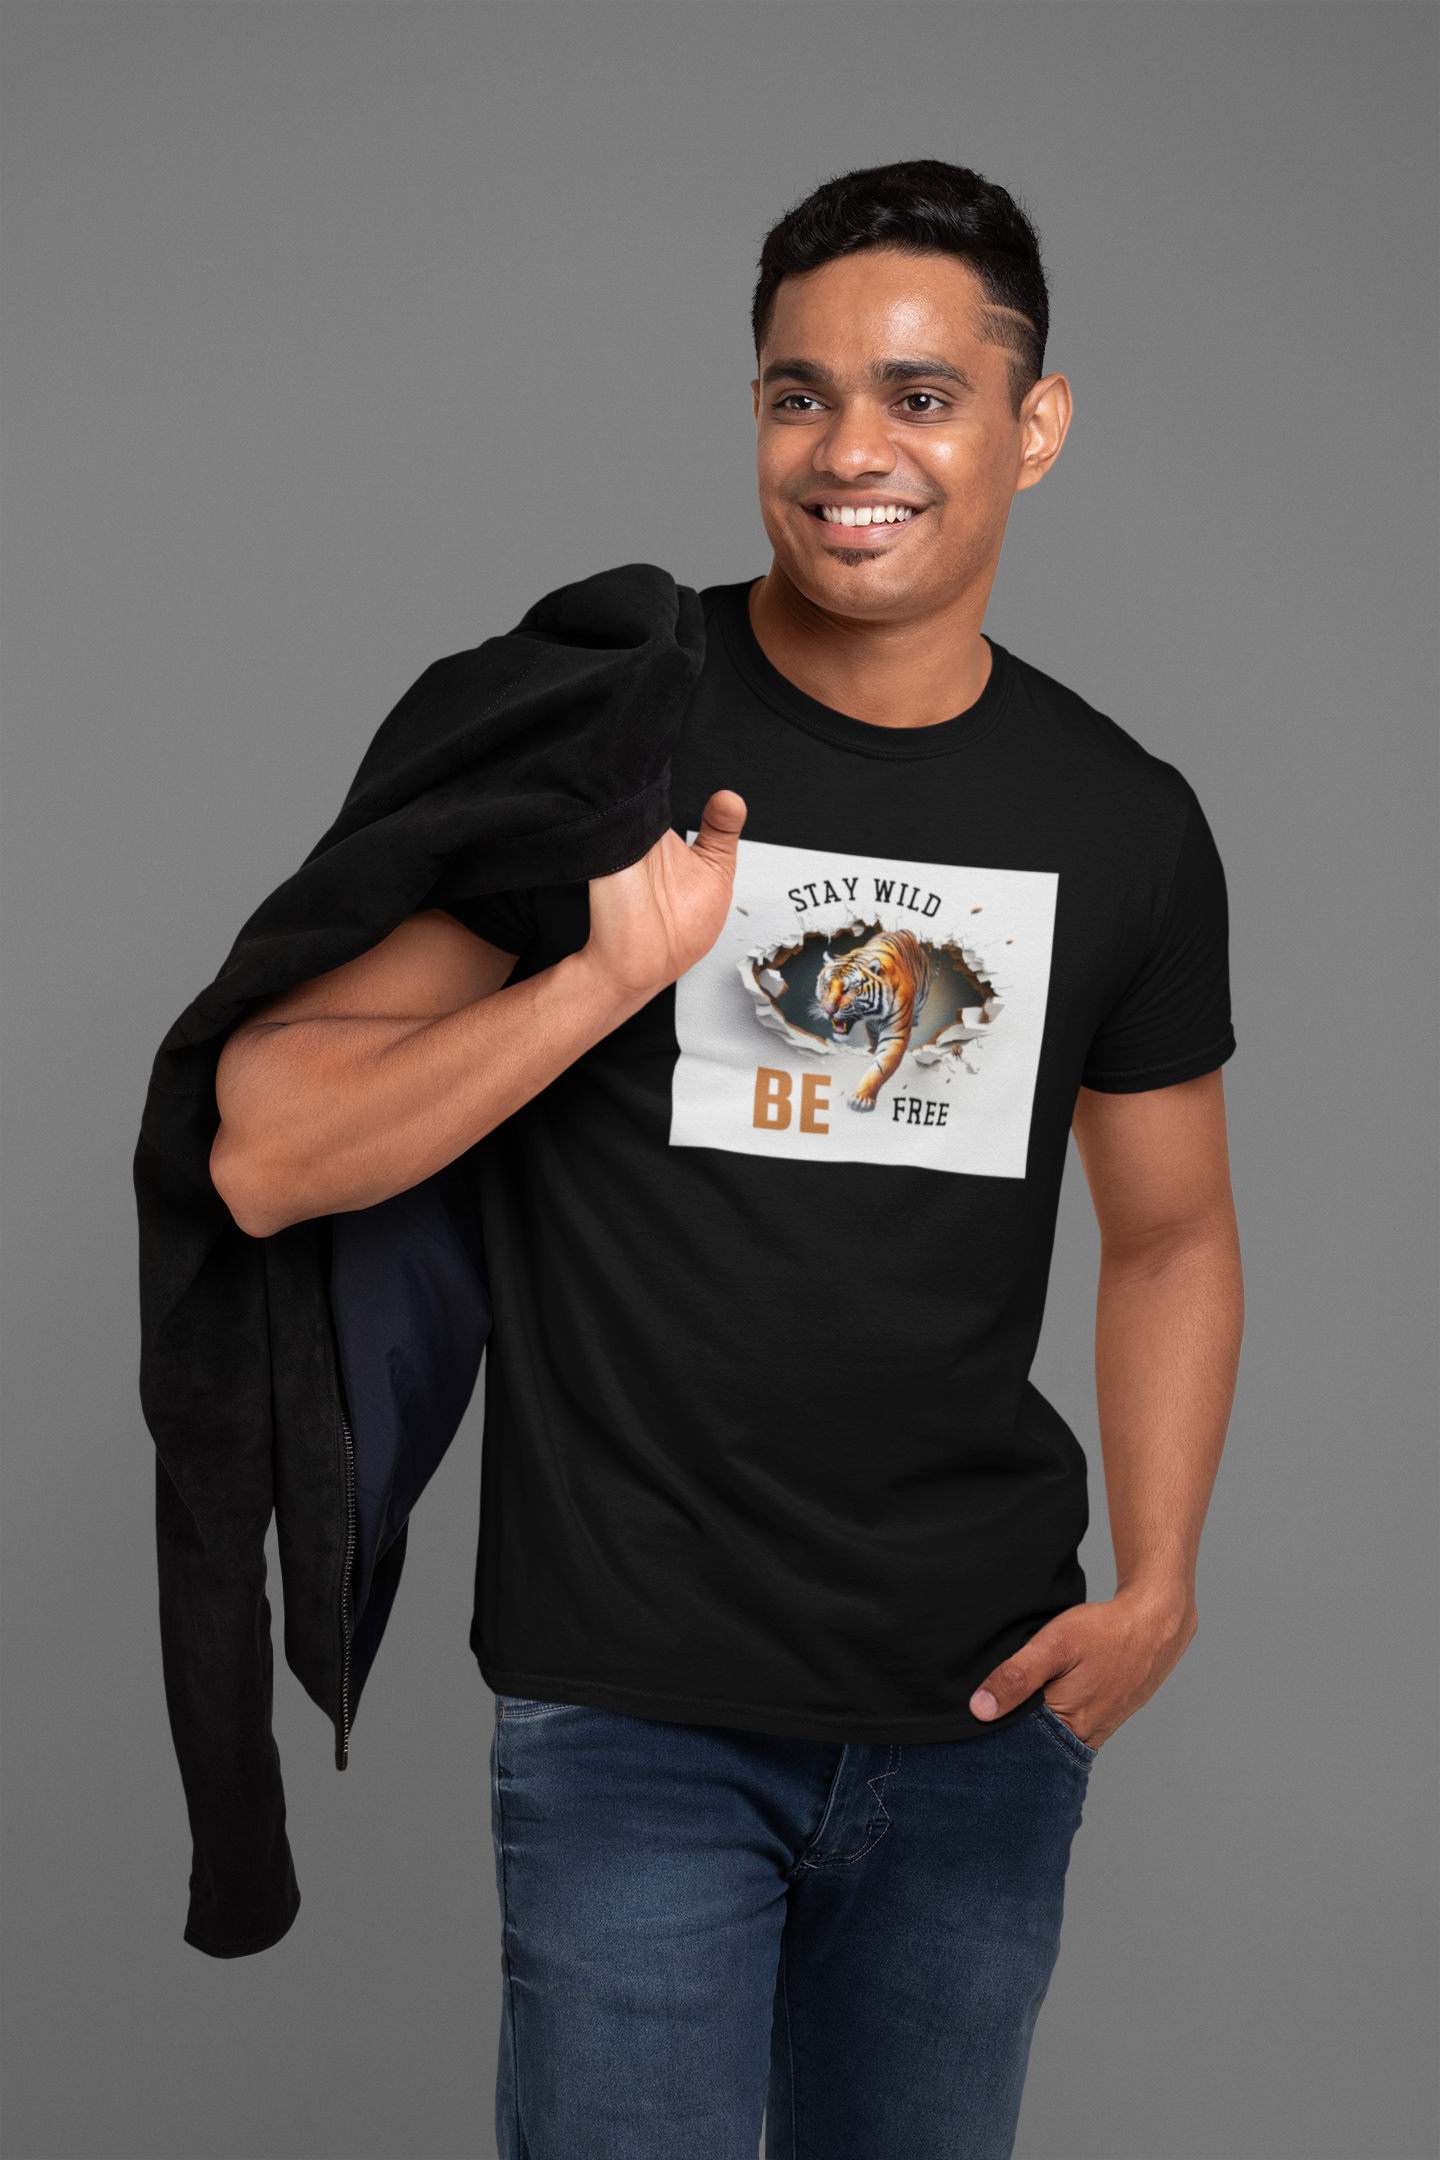 Stay Wild Be Free - Comfortable Cotton T-shirt for a Casual and Stylish Look